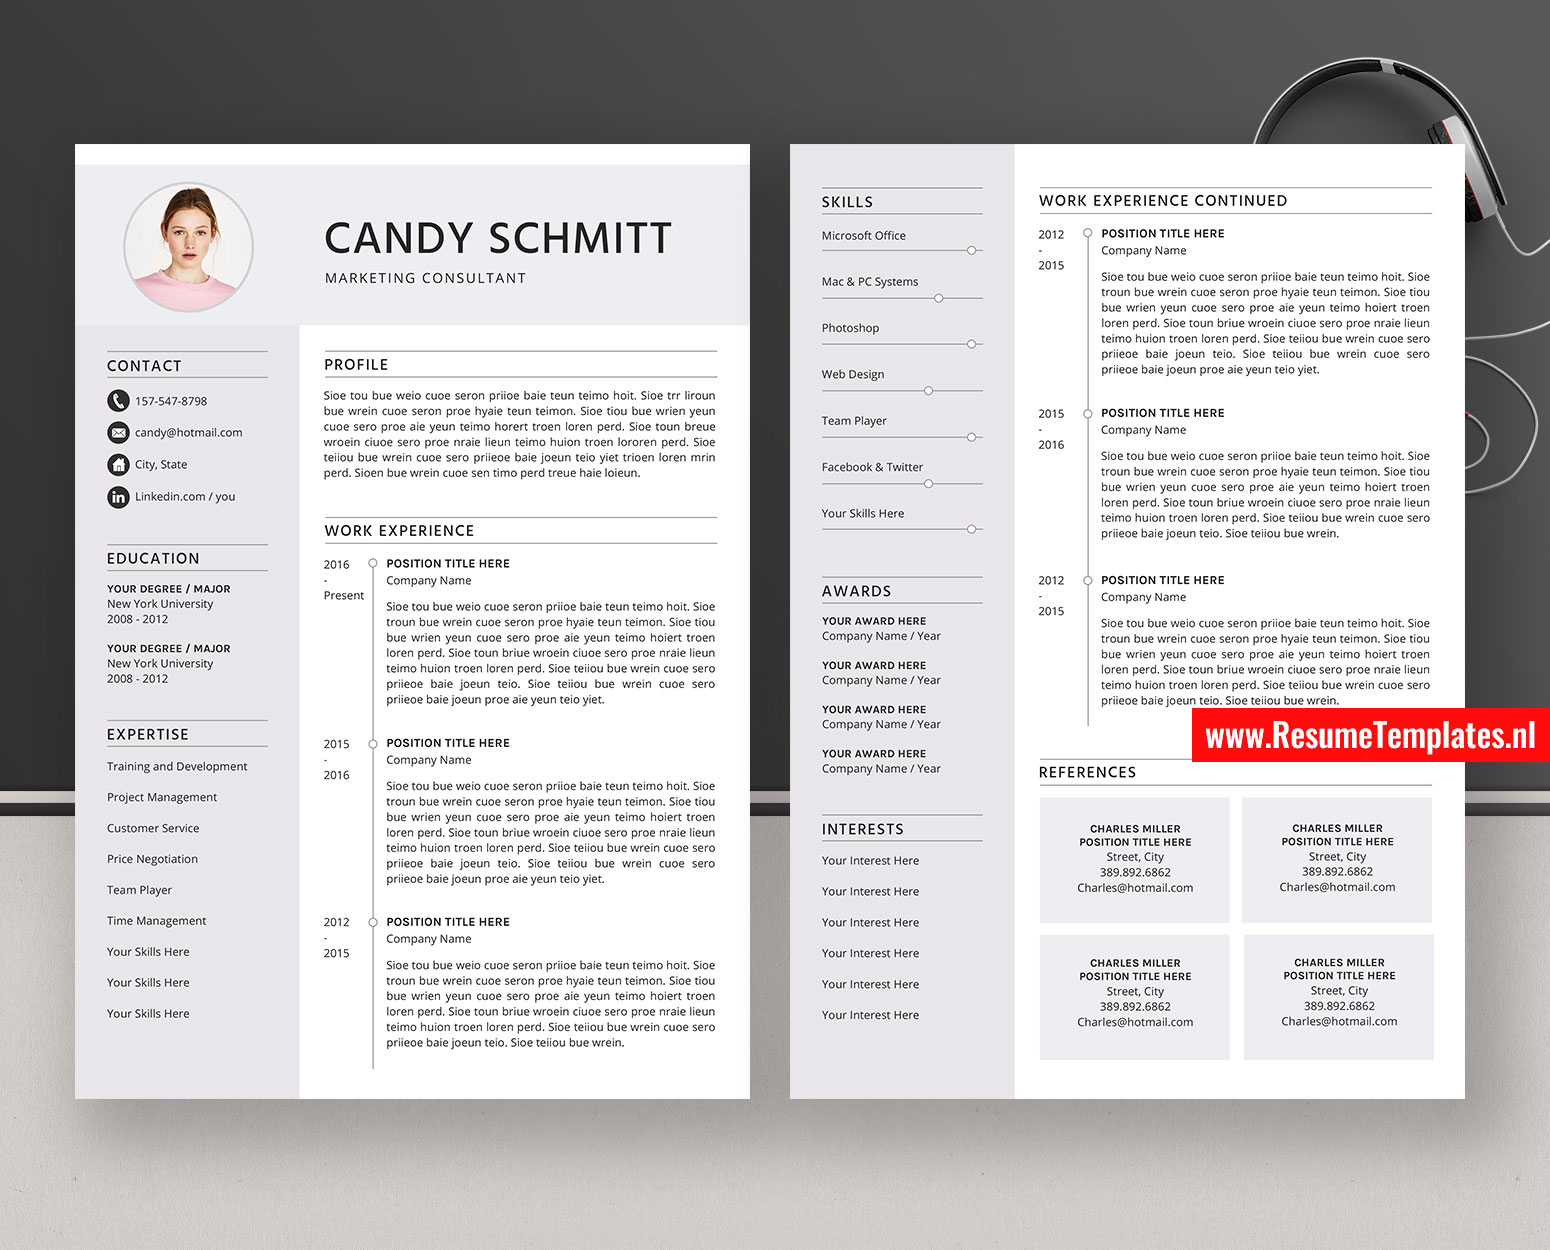 Modern Cv Template Resume Template For Ms Word Curriculum Vitae Cover Letter Professional Resume Creative Resume Teacher Resume Editable in size 1550 X 1250